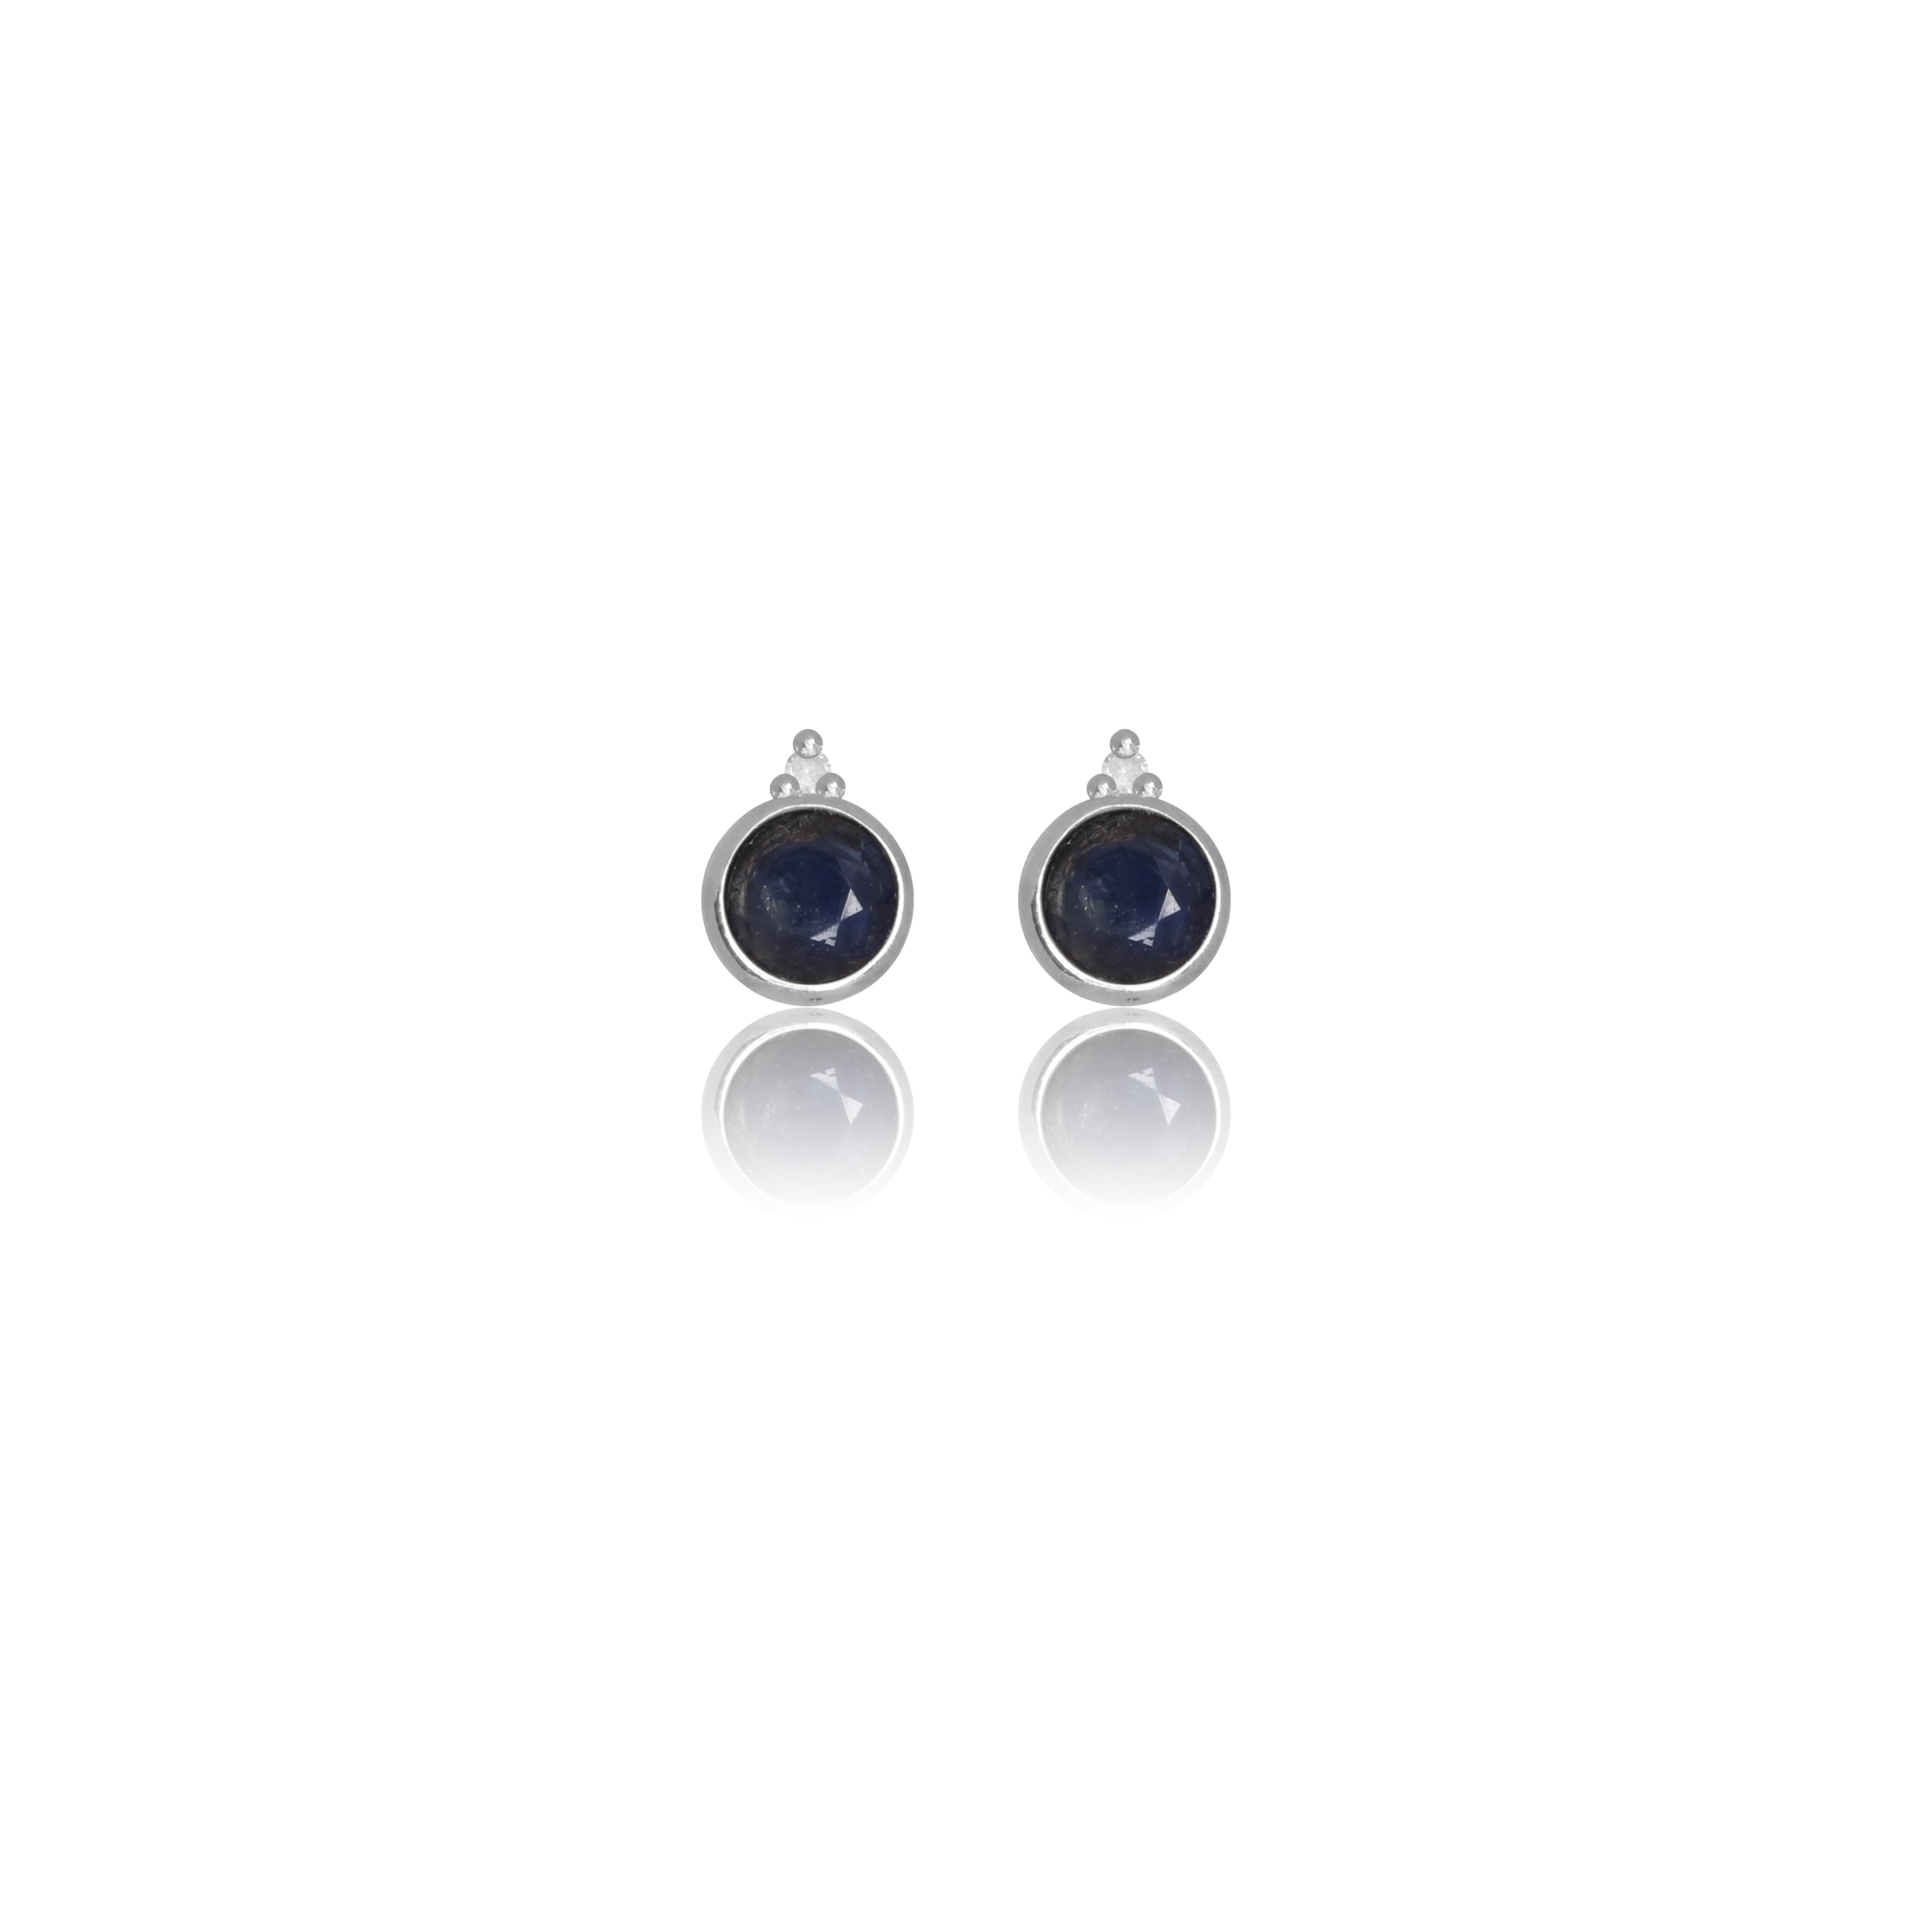 DIAMONDS BY GEORGINI NATURAL SAPPHIRE AND TWO NATURAL DIAMOND SEPTEMBER EARRINGS SILVER